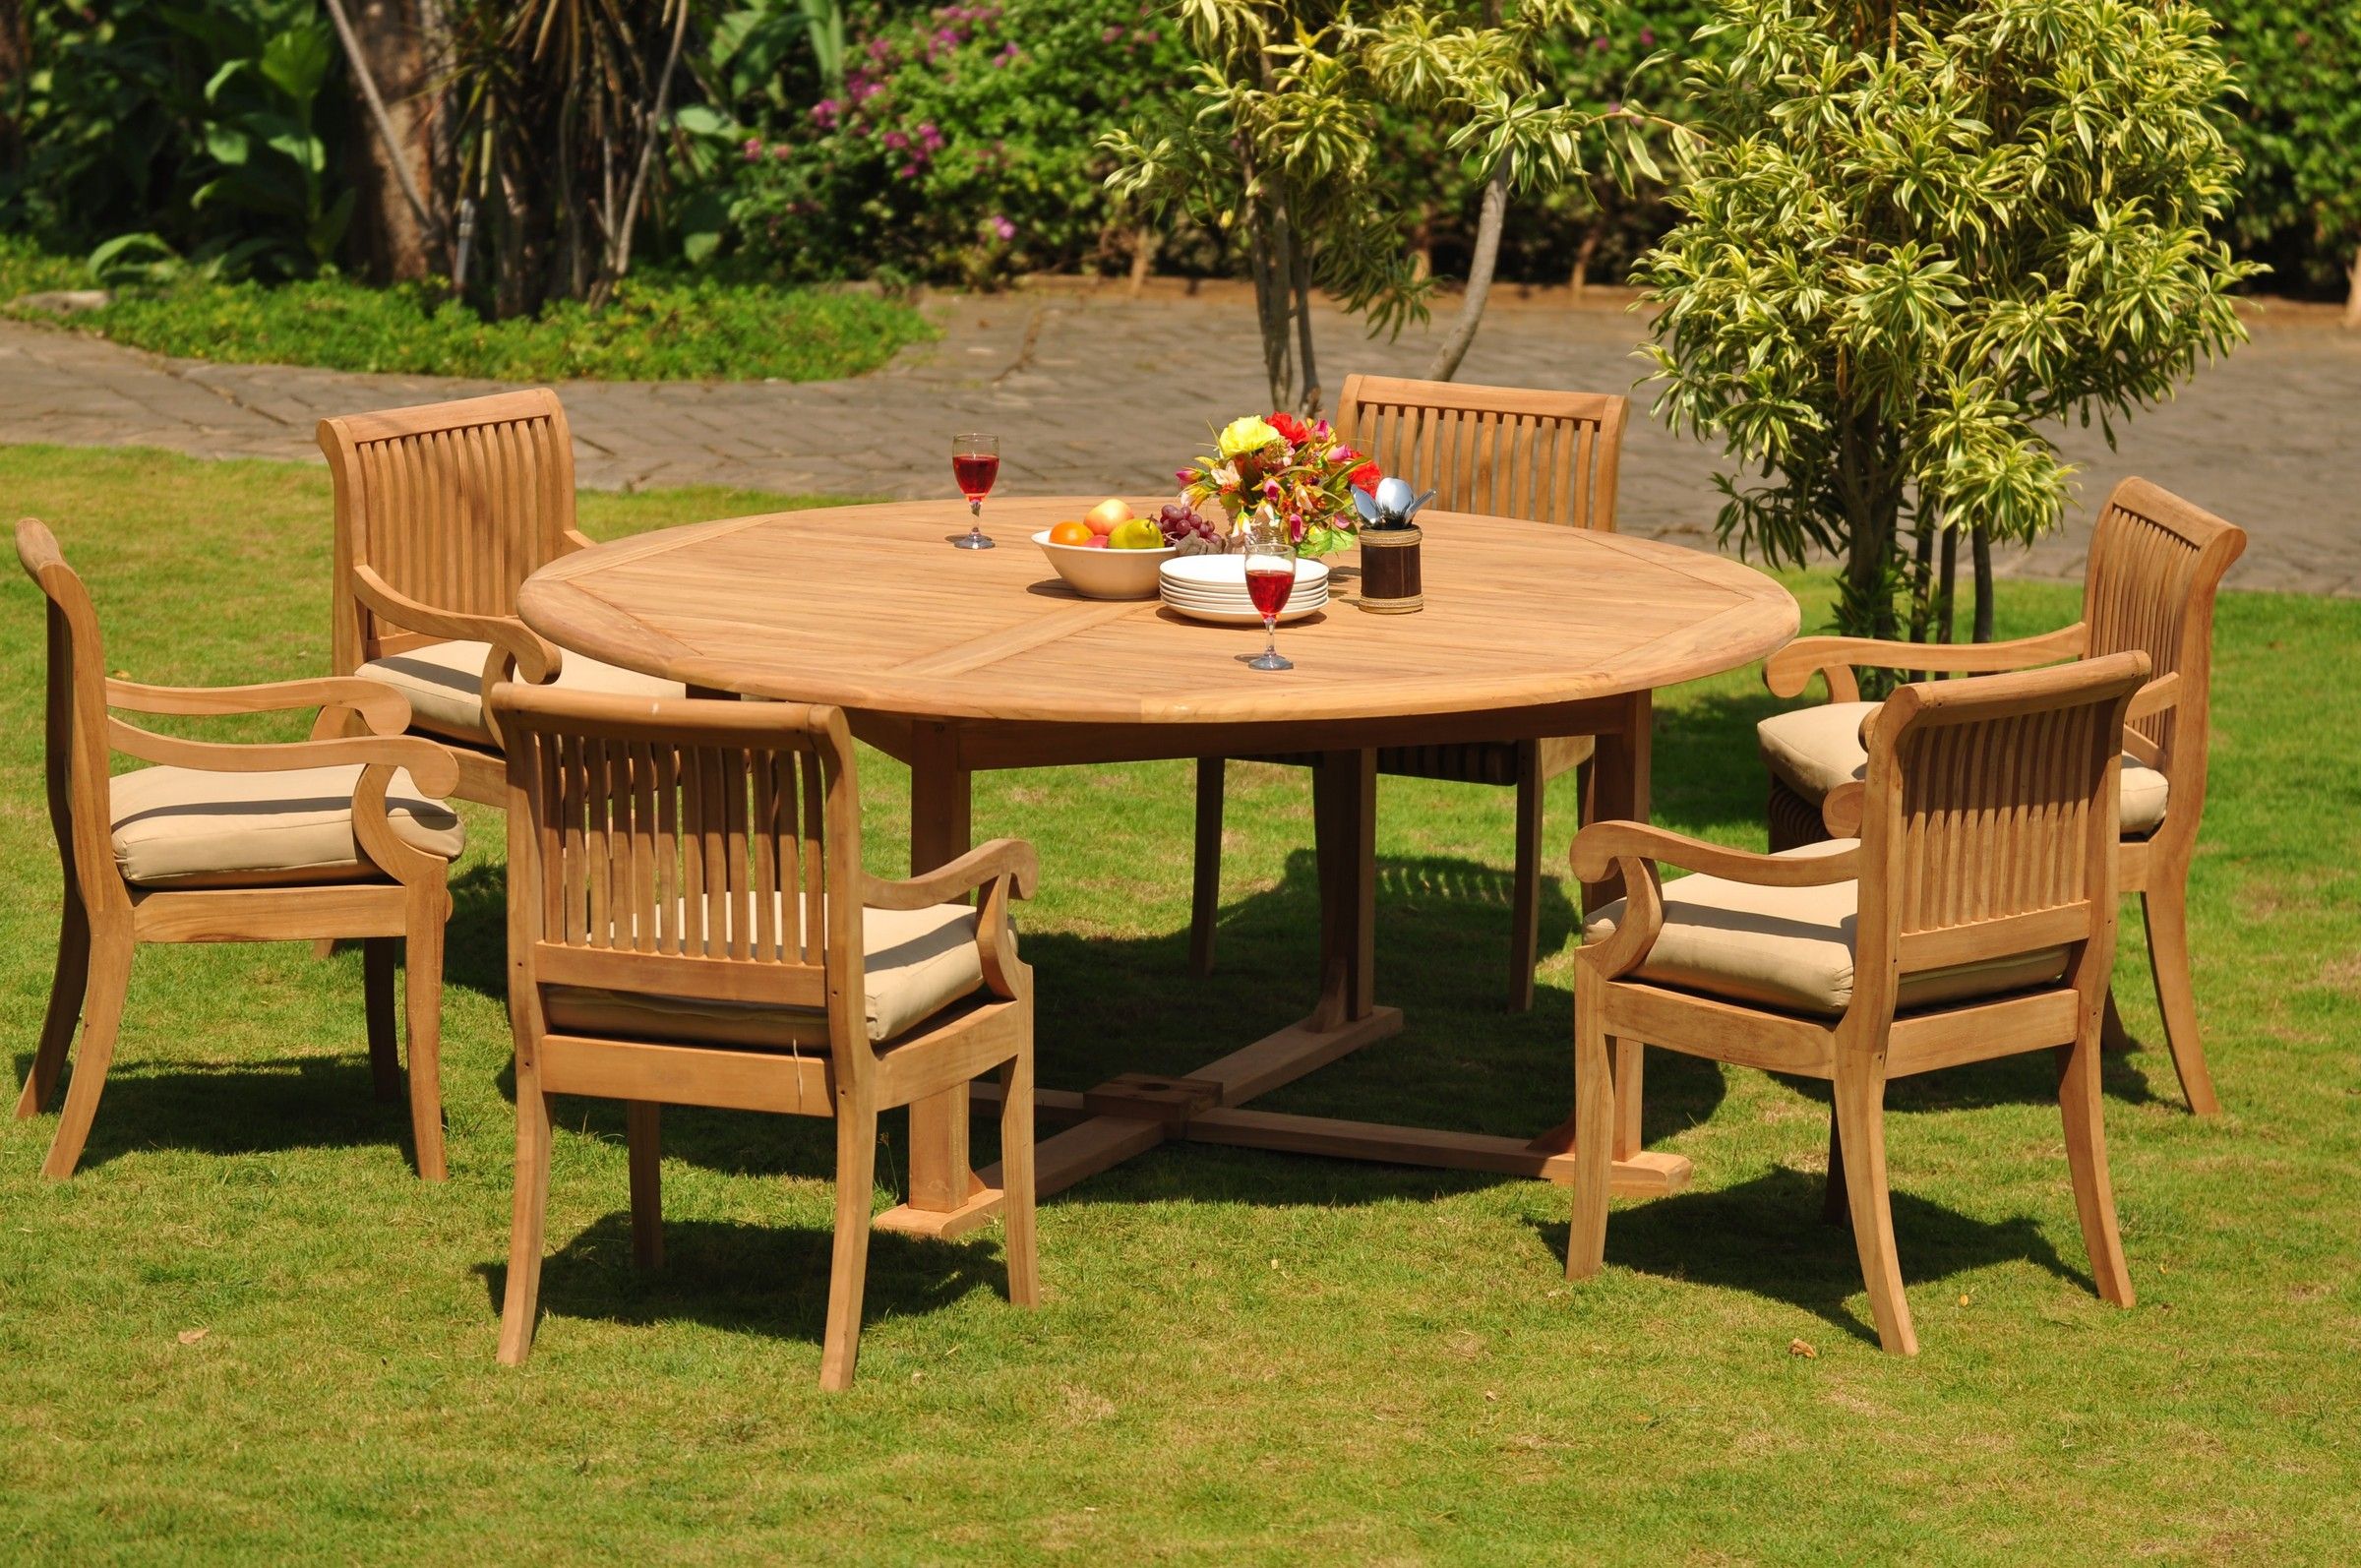 Teak Dining Set: 6 Seater 7 Pc: 72" Round Table And 6 Giva Arm Chairs Inside Teak Outdoor Loungers Sets (View 11 of 15)